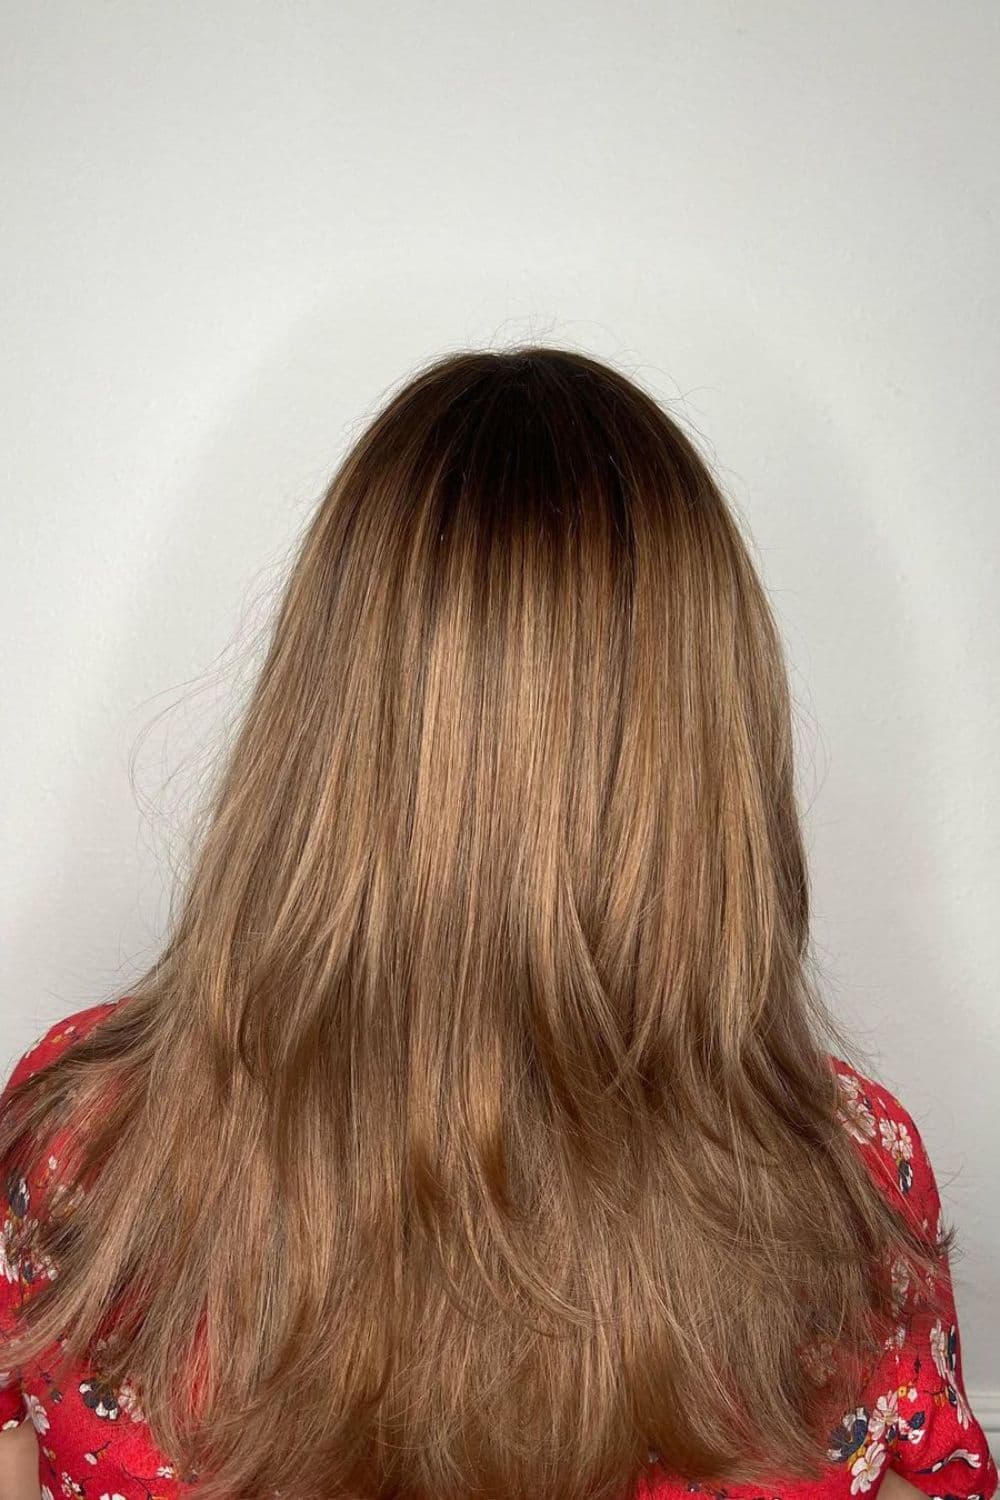 A woman with long layered dirty blonde hair with shadow root.